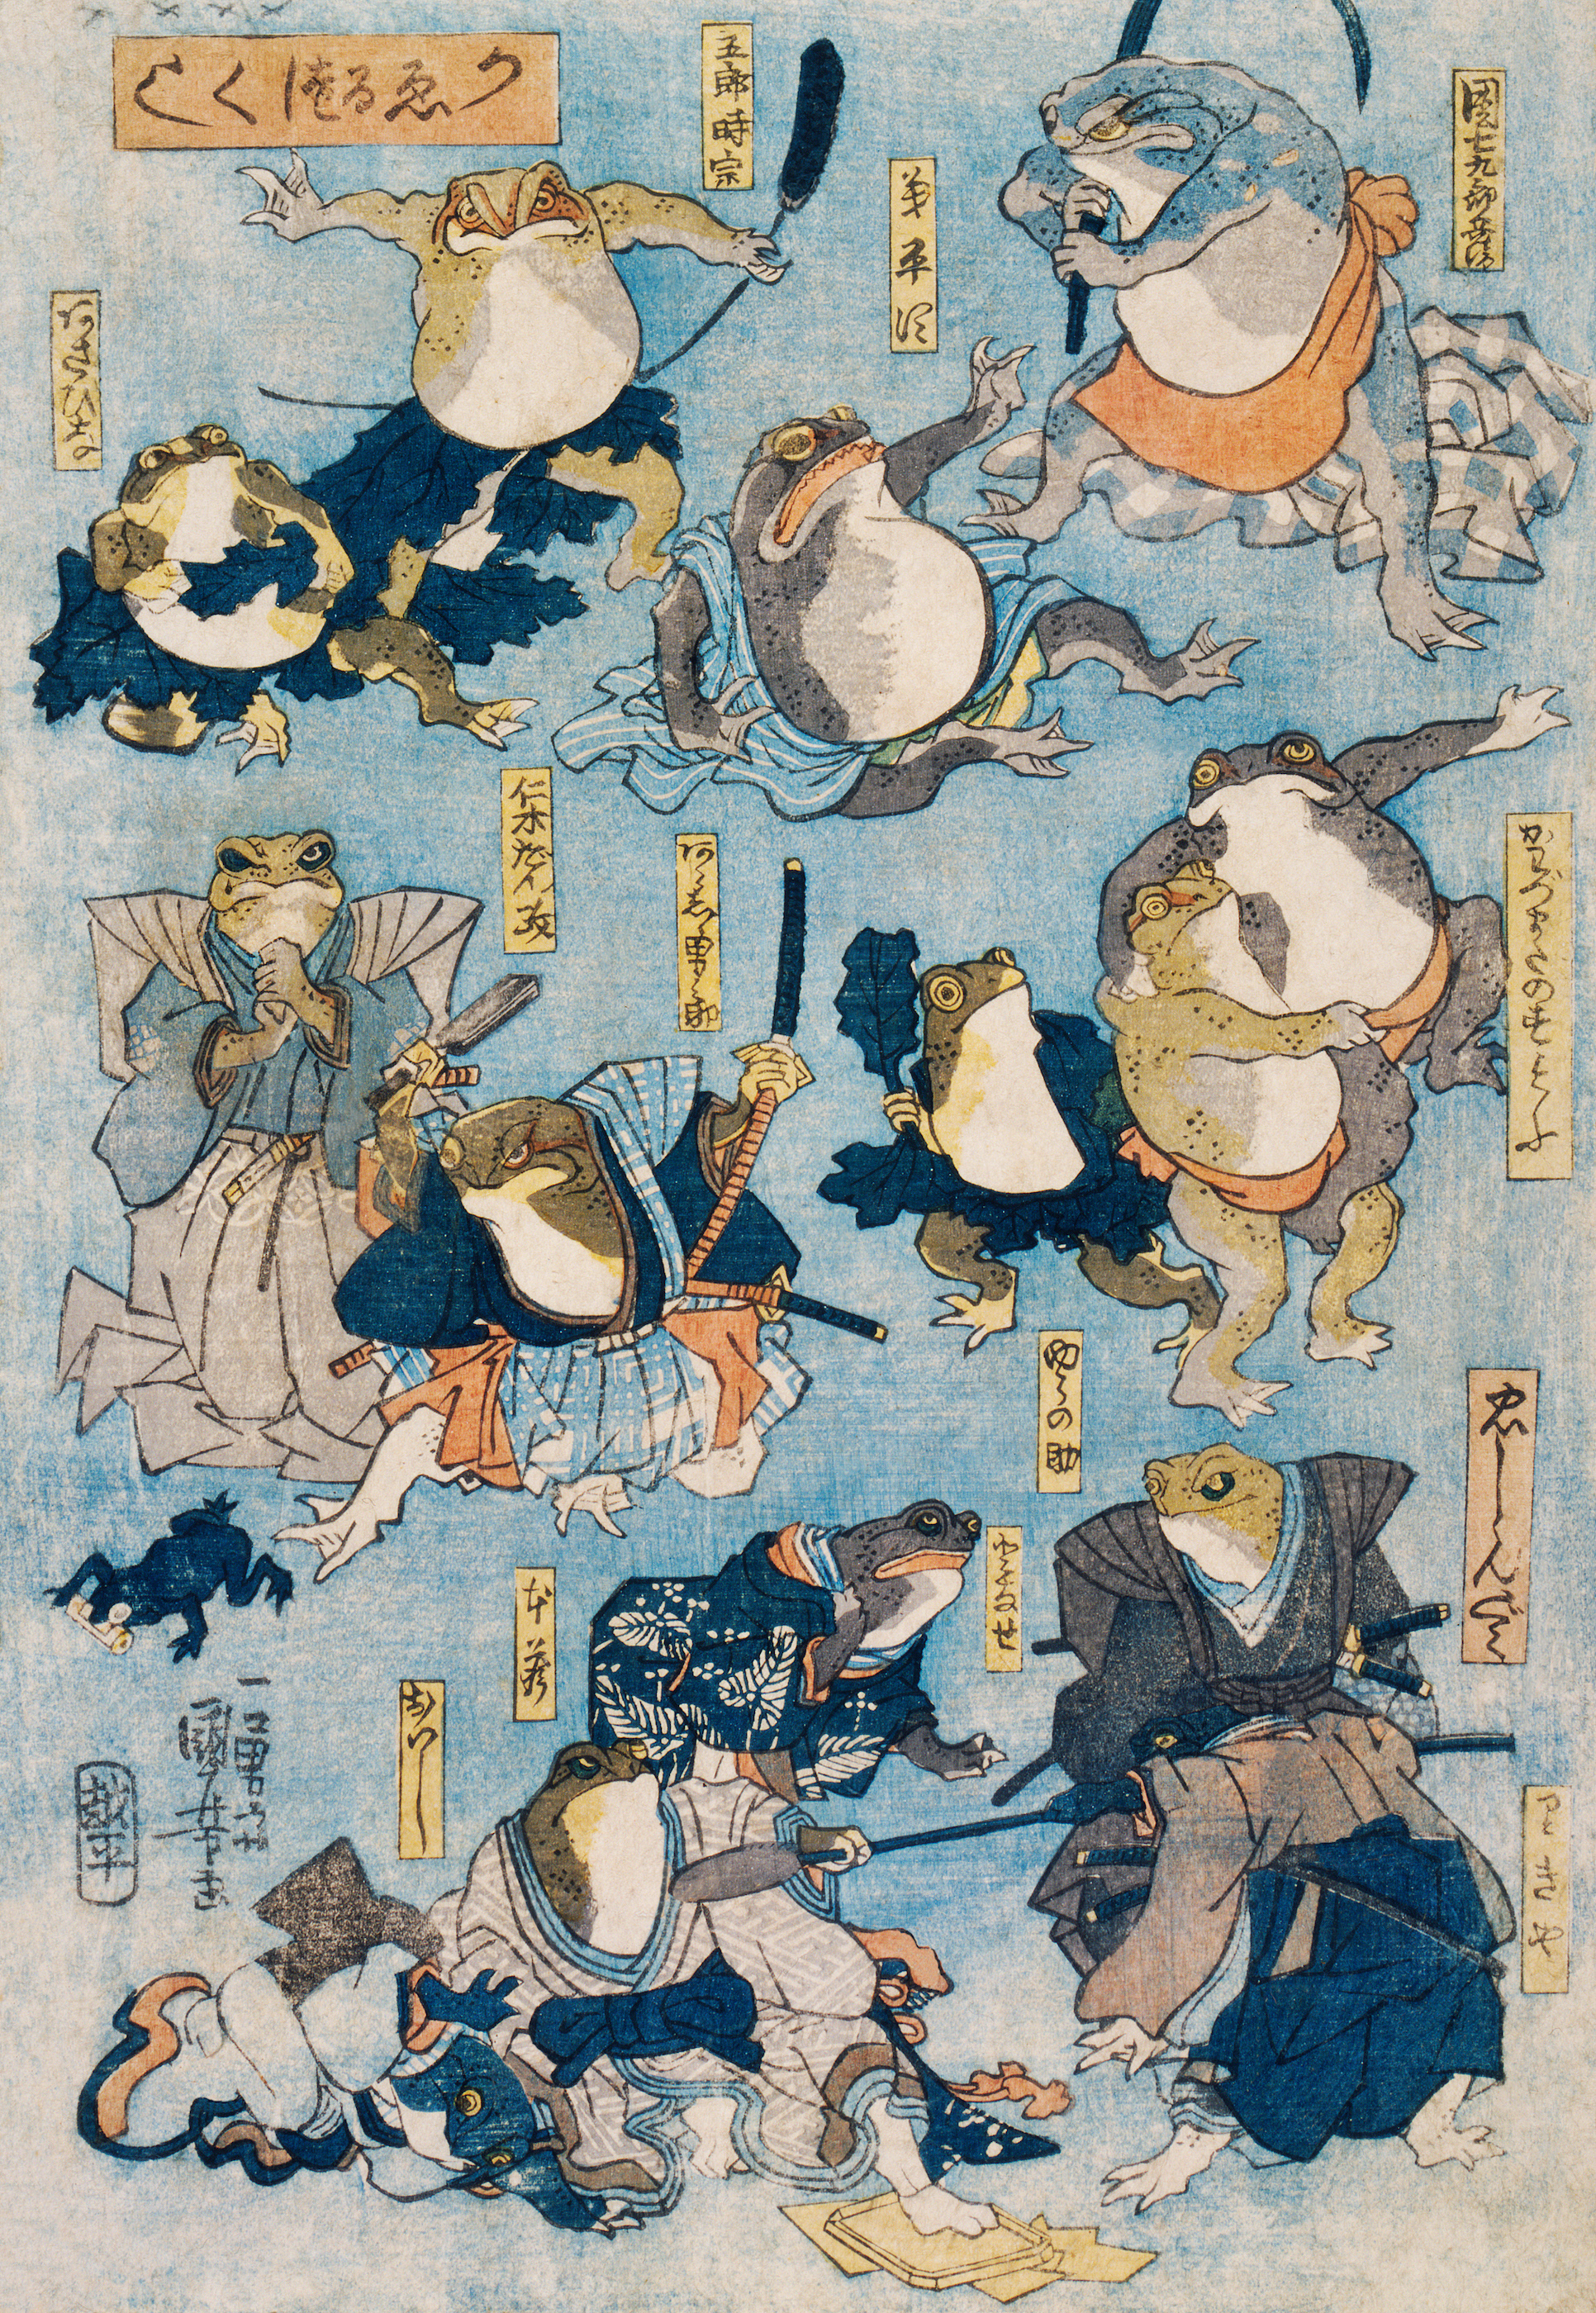 Famous Heroes of the Kabuki Stage Played by Frogs by Utagawa Kuniyoshi - c. 1875 Library of Congress